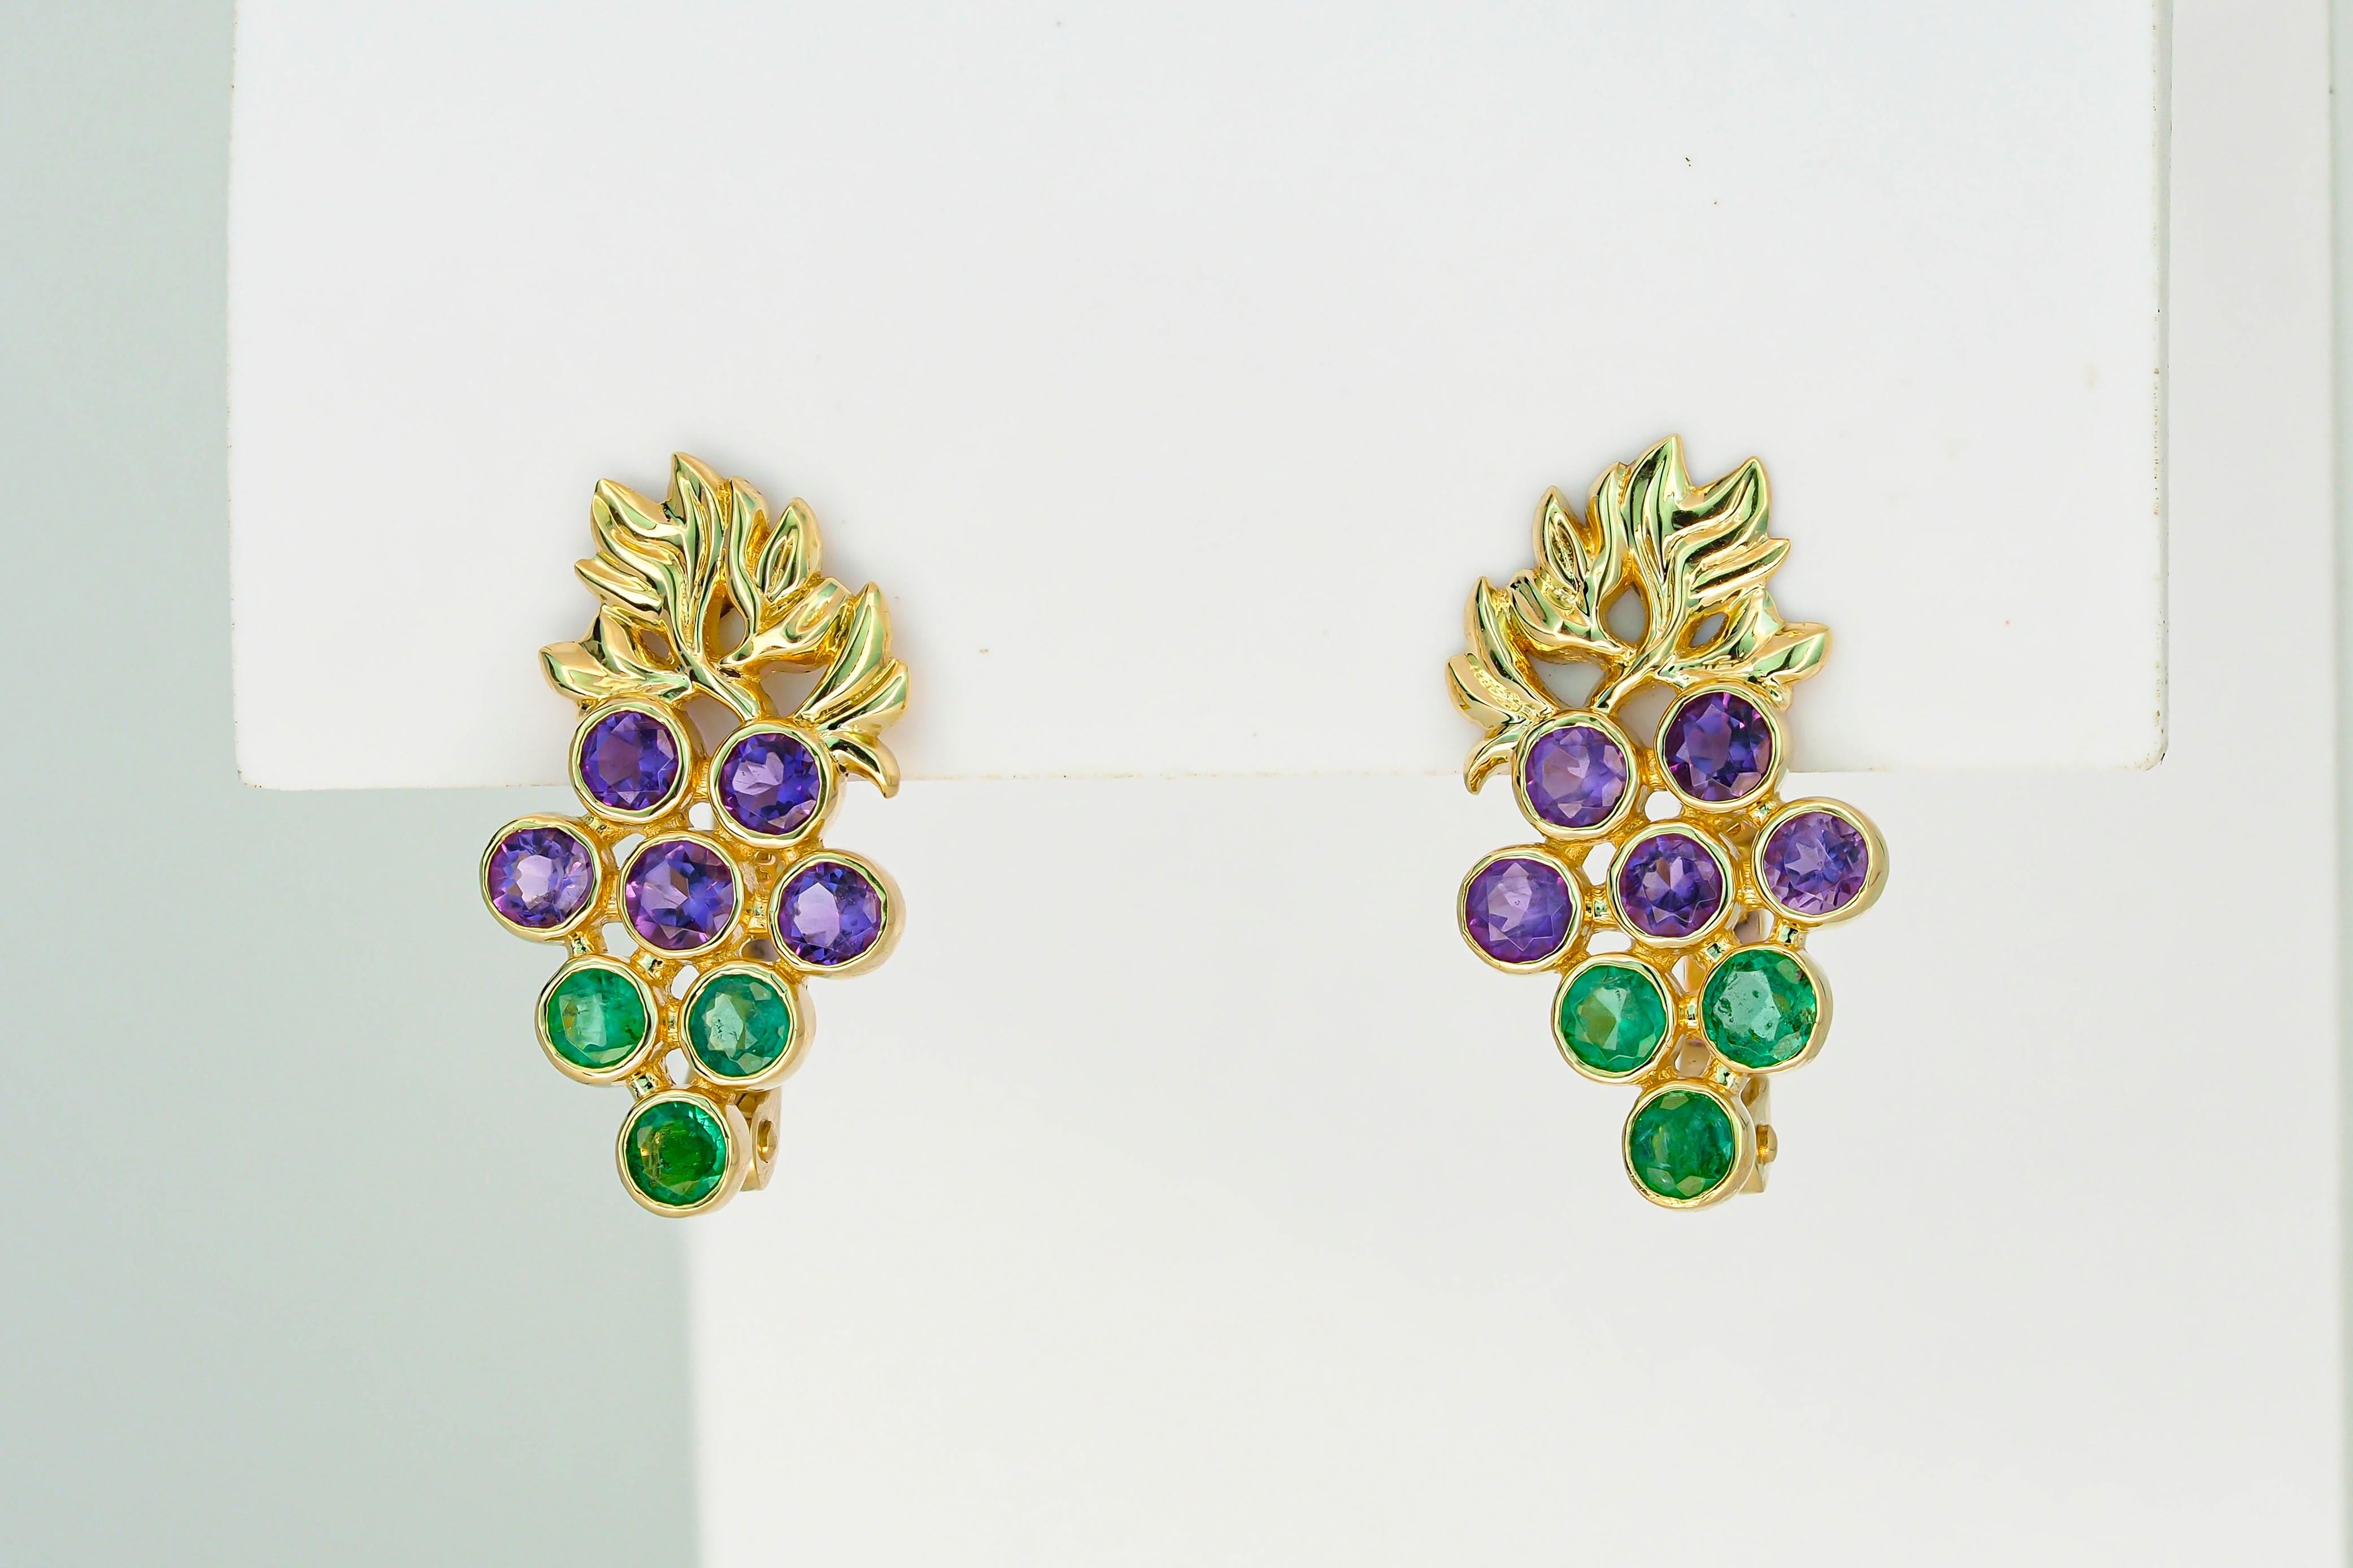 14k Gold Grape Earrings with Emeralds and Amethysts For Sale 2